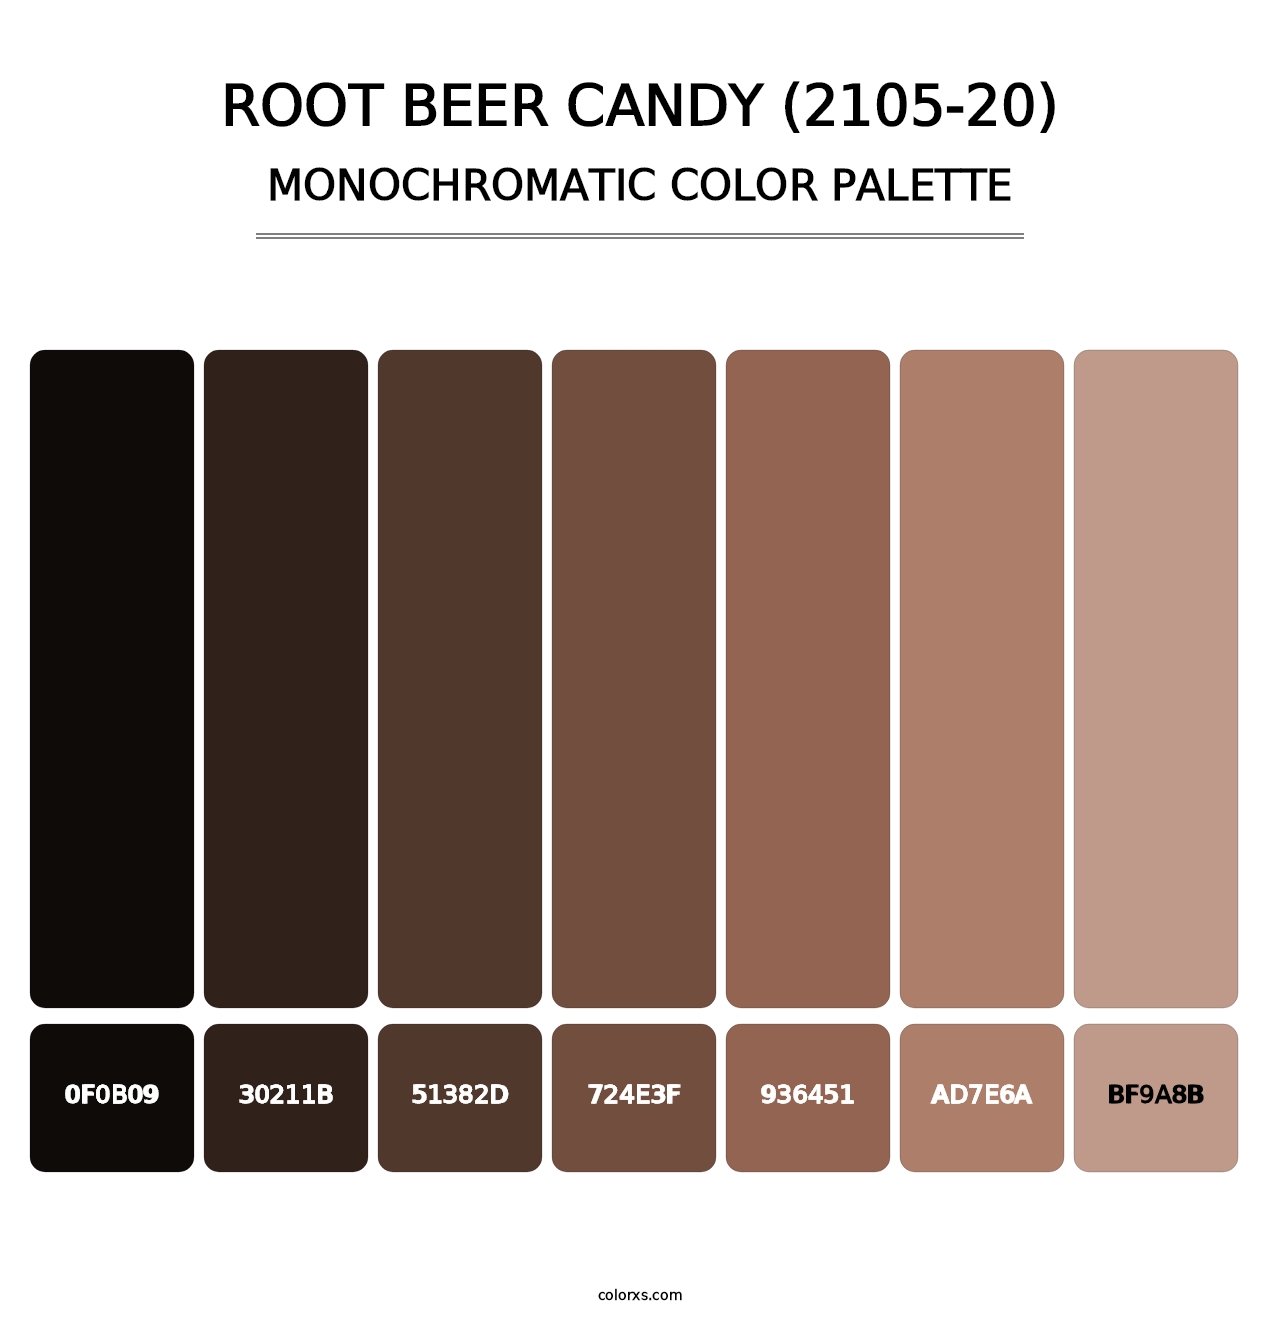 Root Beer Candy (2105-20) - Monochromatic Color Palette